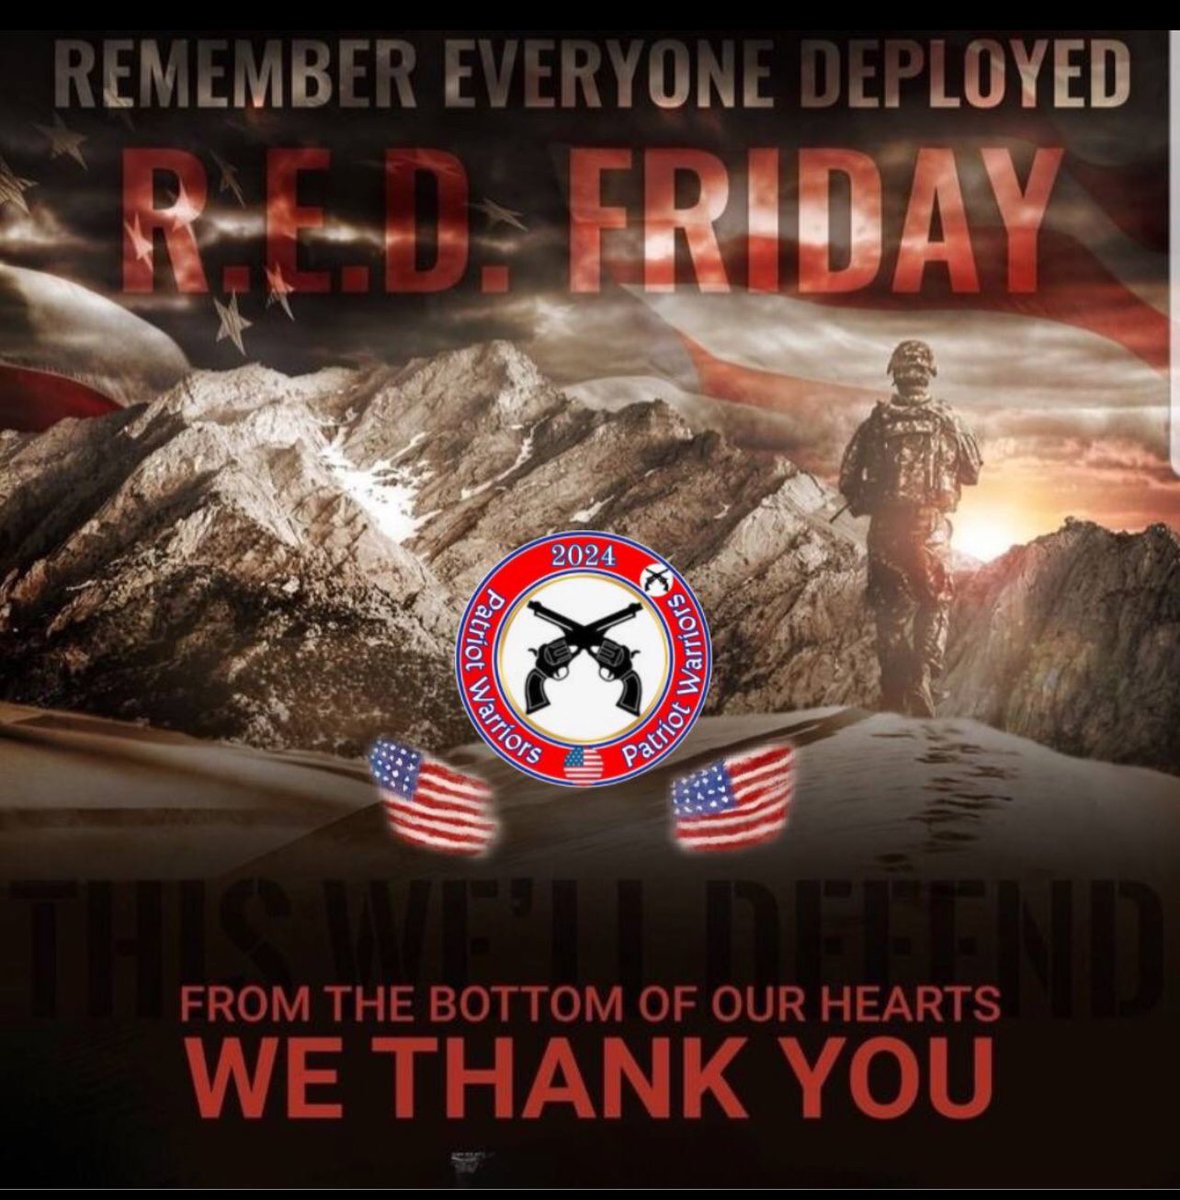 🚨 Boomer 🚂 254 🚨 🇺🇸🇺🇸🇺🇸 We owe our veterans and active military everything for our American freedoms!! 🇺🇸🇺🇸🇺🇸 @Libby4Liberty0 @WraithCustoms @rezfreed @bdonesem @Lissa4Trump @SrvG_d @StevenLegacy411 @GilbertWanda @UPMHPM @jessies_now @gary_jaen @Ohio_buckeye_us